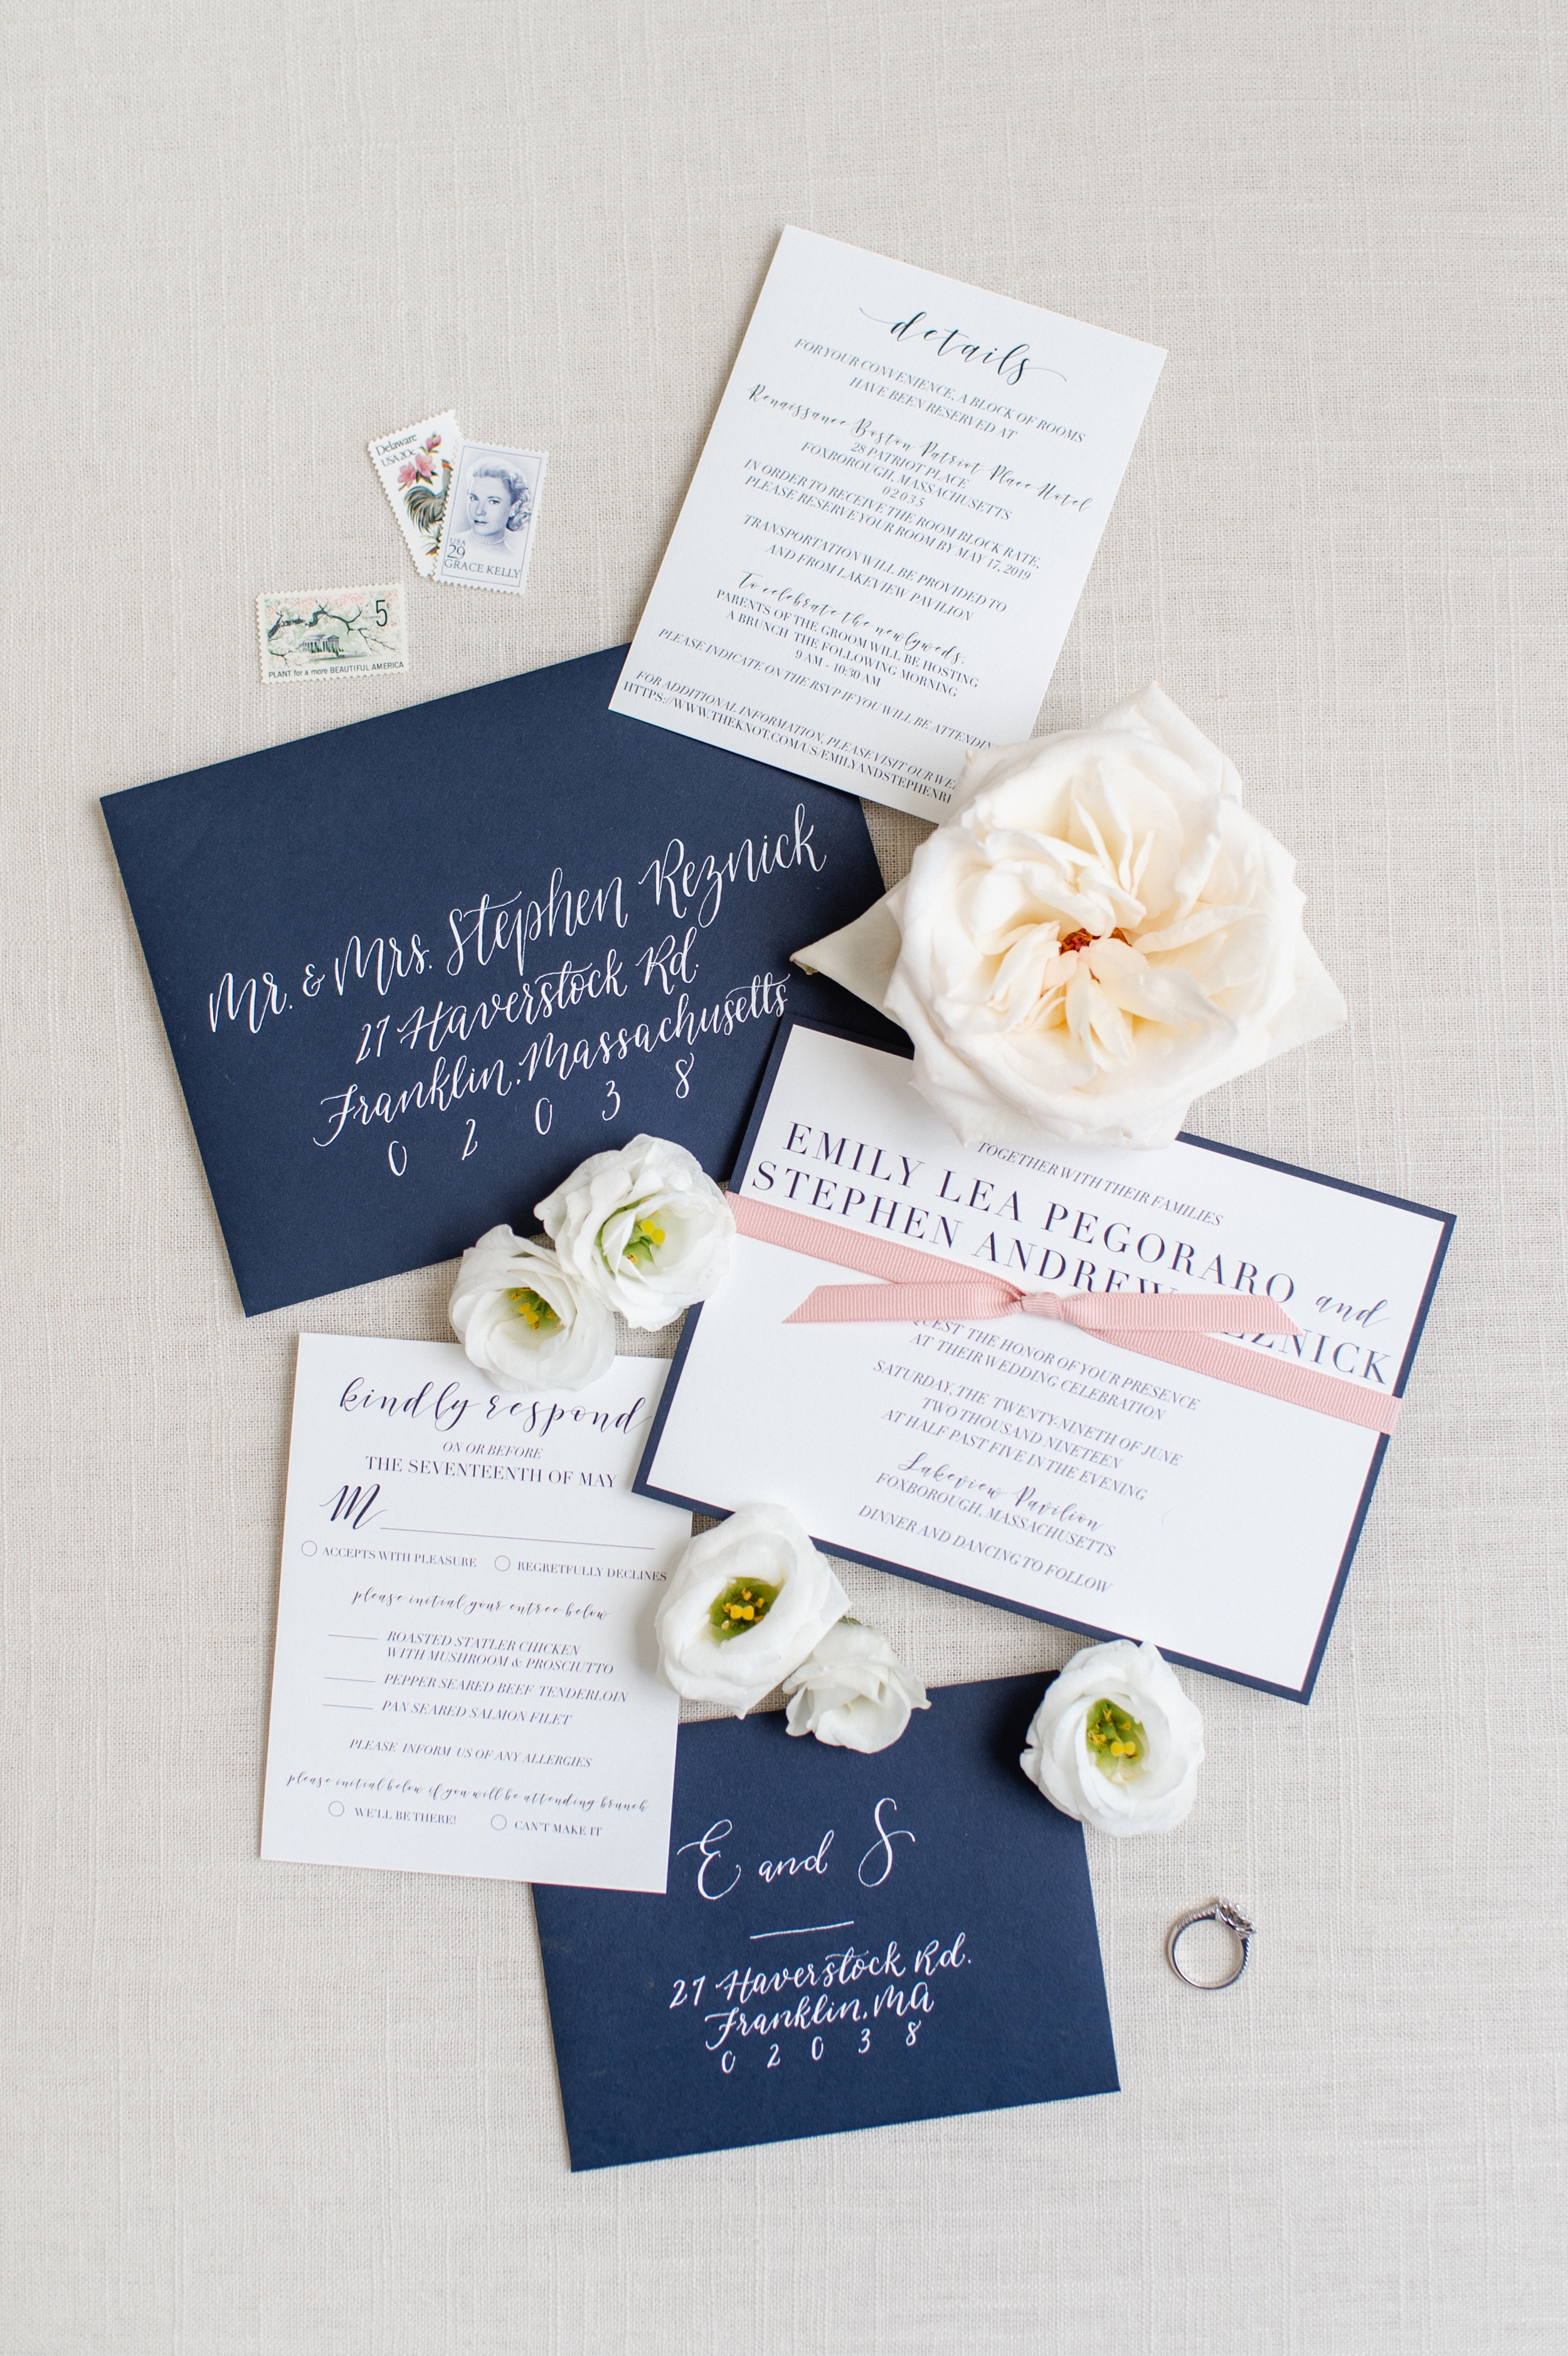 Lakeview Pavilion Wedding navy and blush invitation suite with calligraphy and ribbon styled bridal flat lay